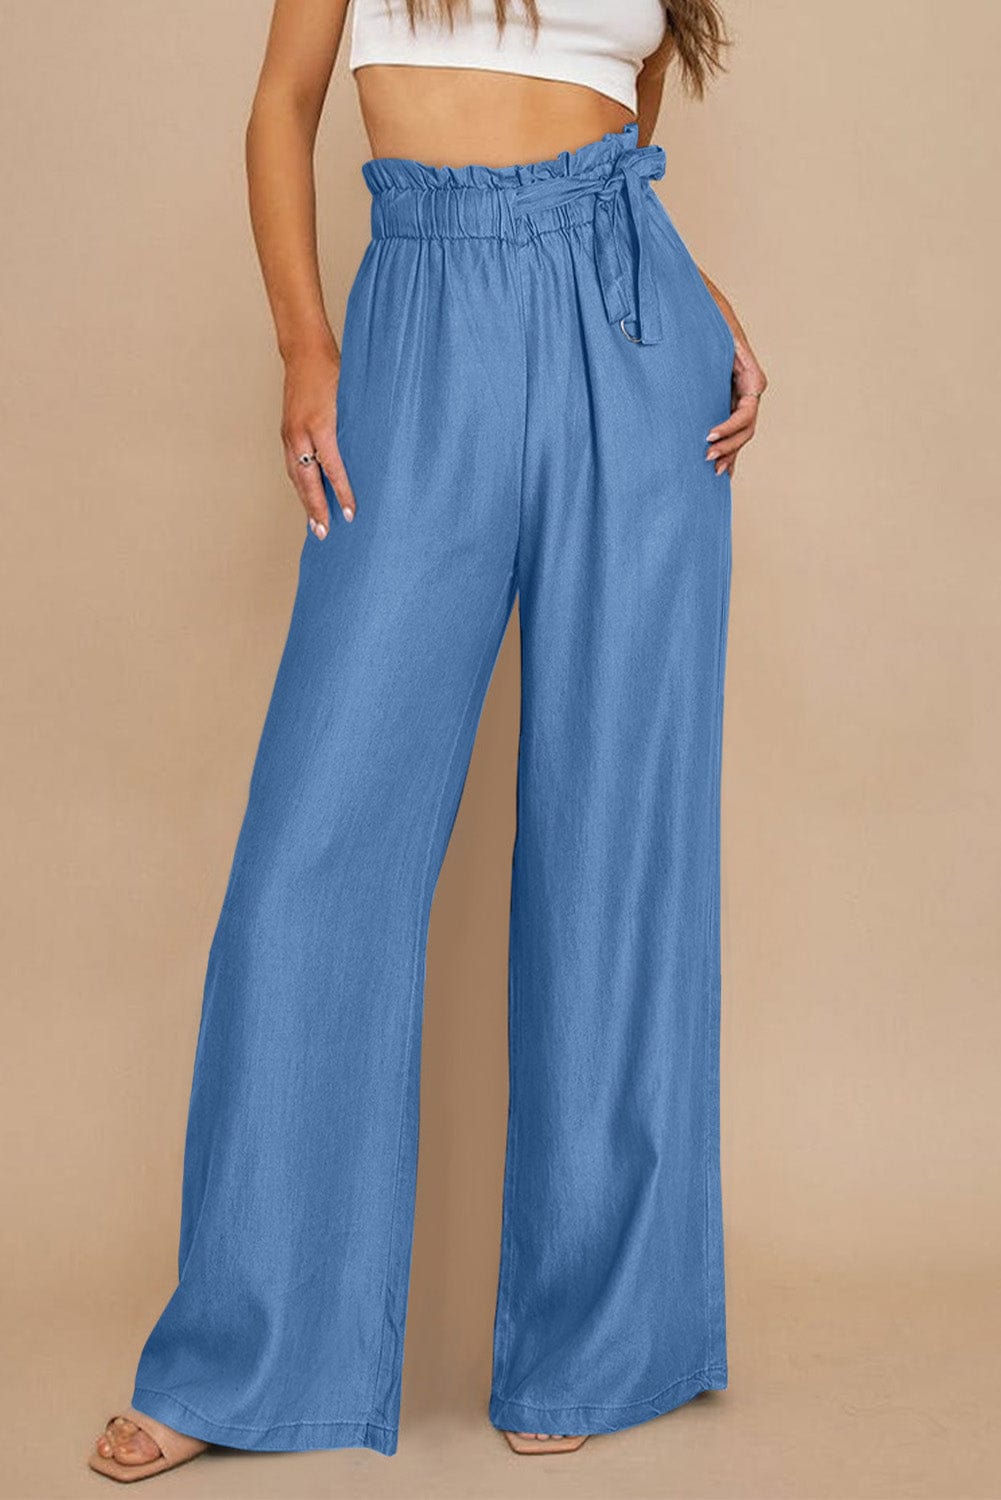 The802Gypsy  Bottoms Blue-2 / 4 / 66.5%Lyocell+23.9%Polyester+8.2%Cotton+1.4%Elastane Black High Waist Pocketed Wide Leg Tencel Jeans